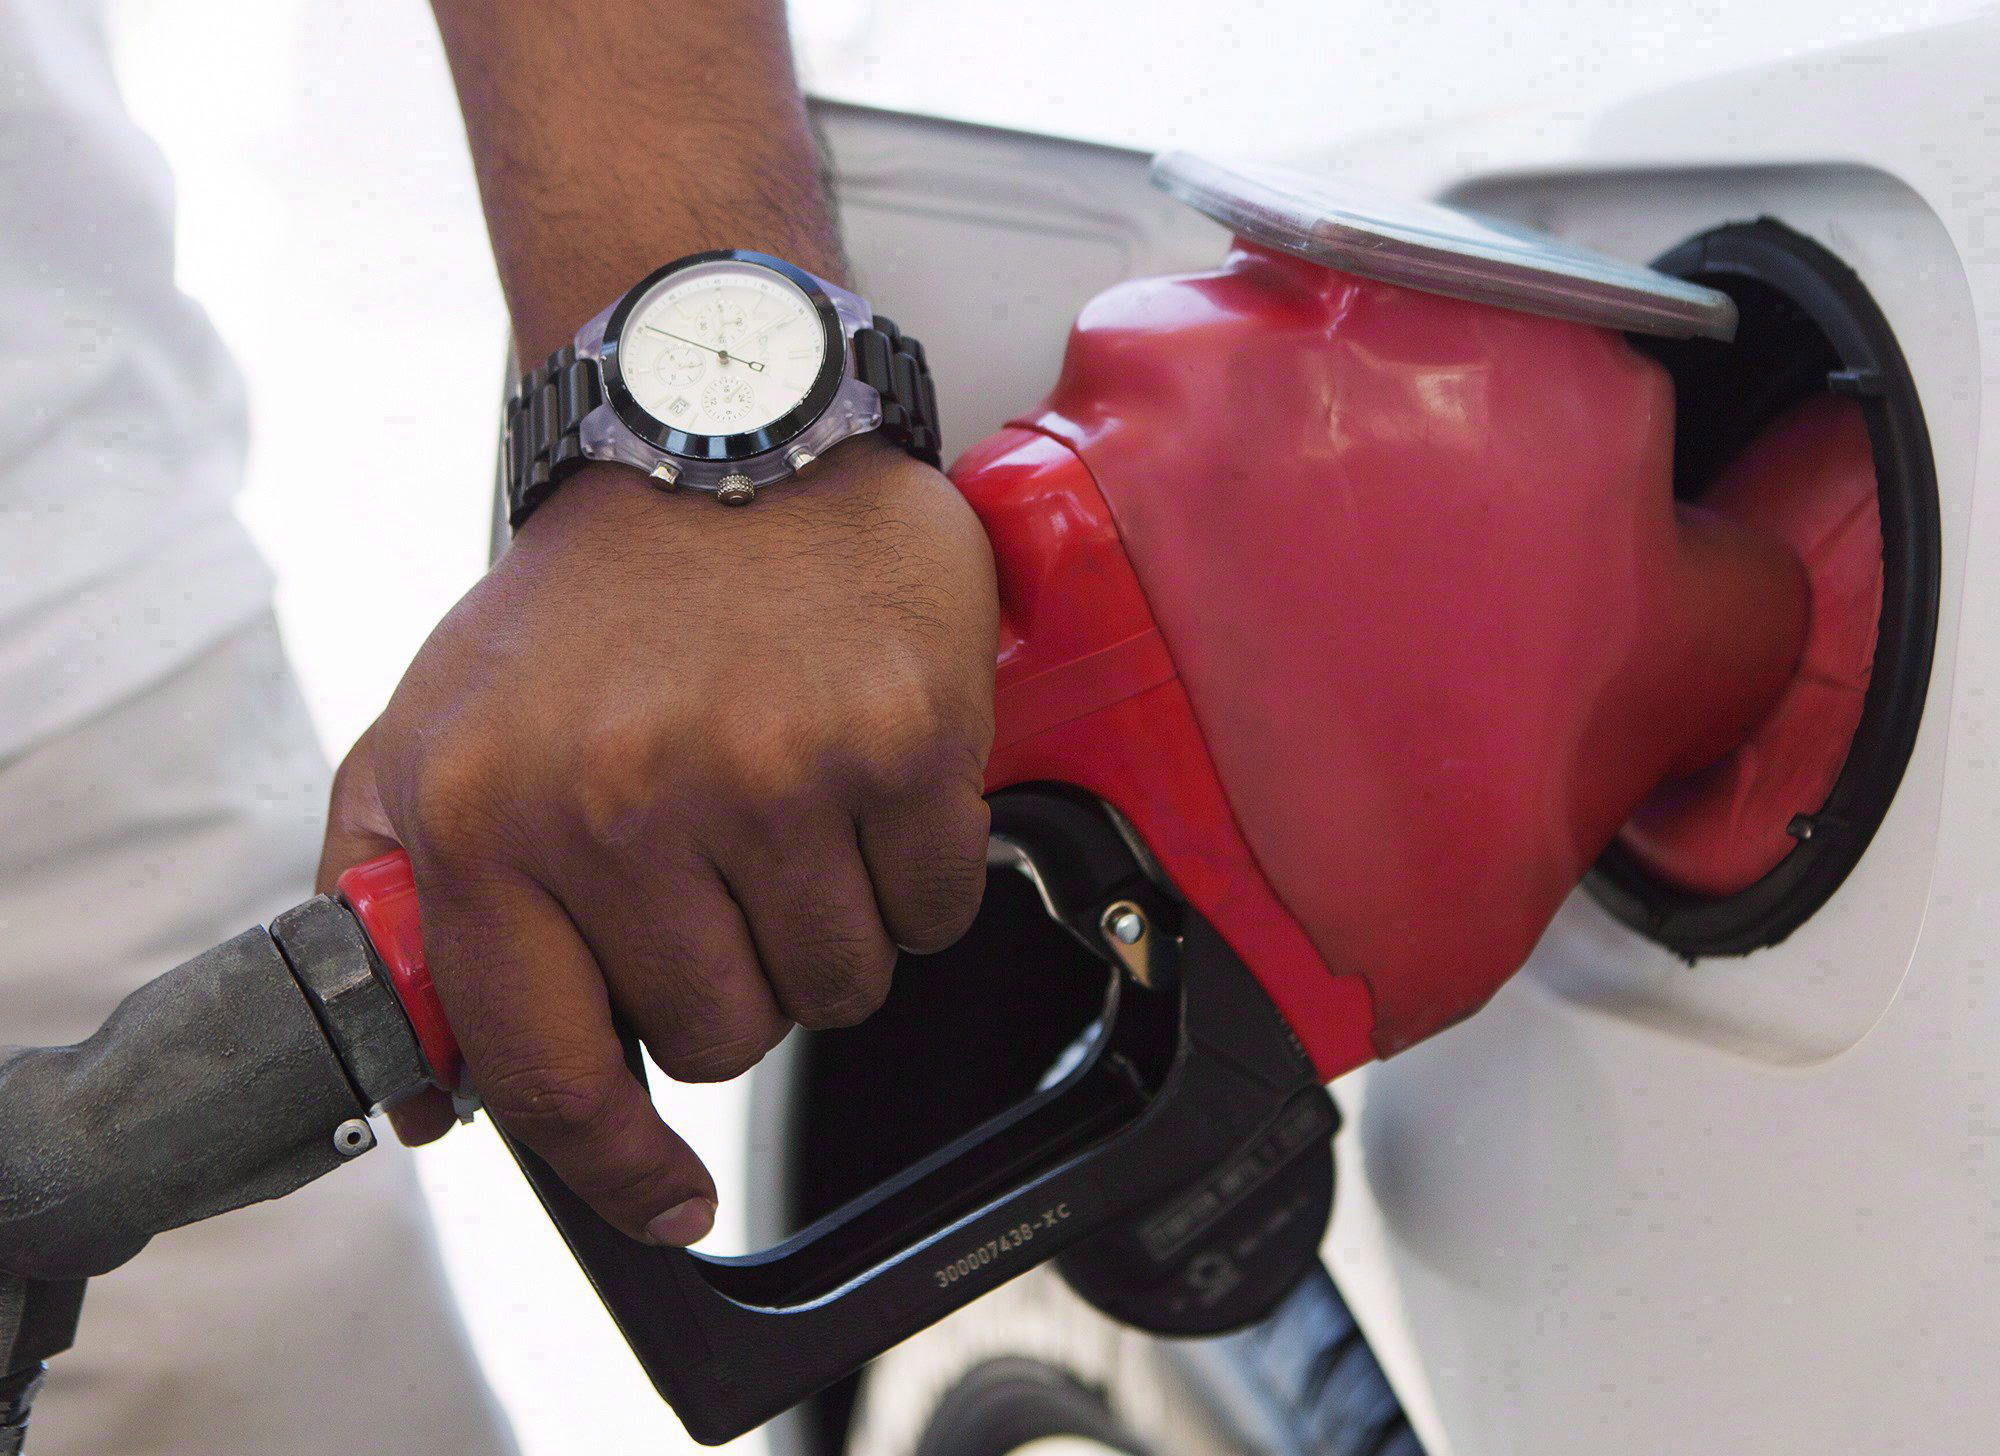 Inflation cools sharply to 3.1% amid lower gas prices